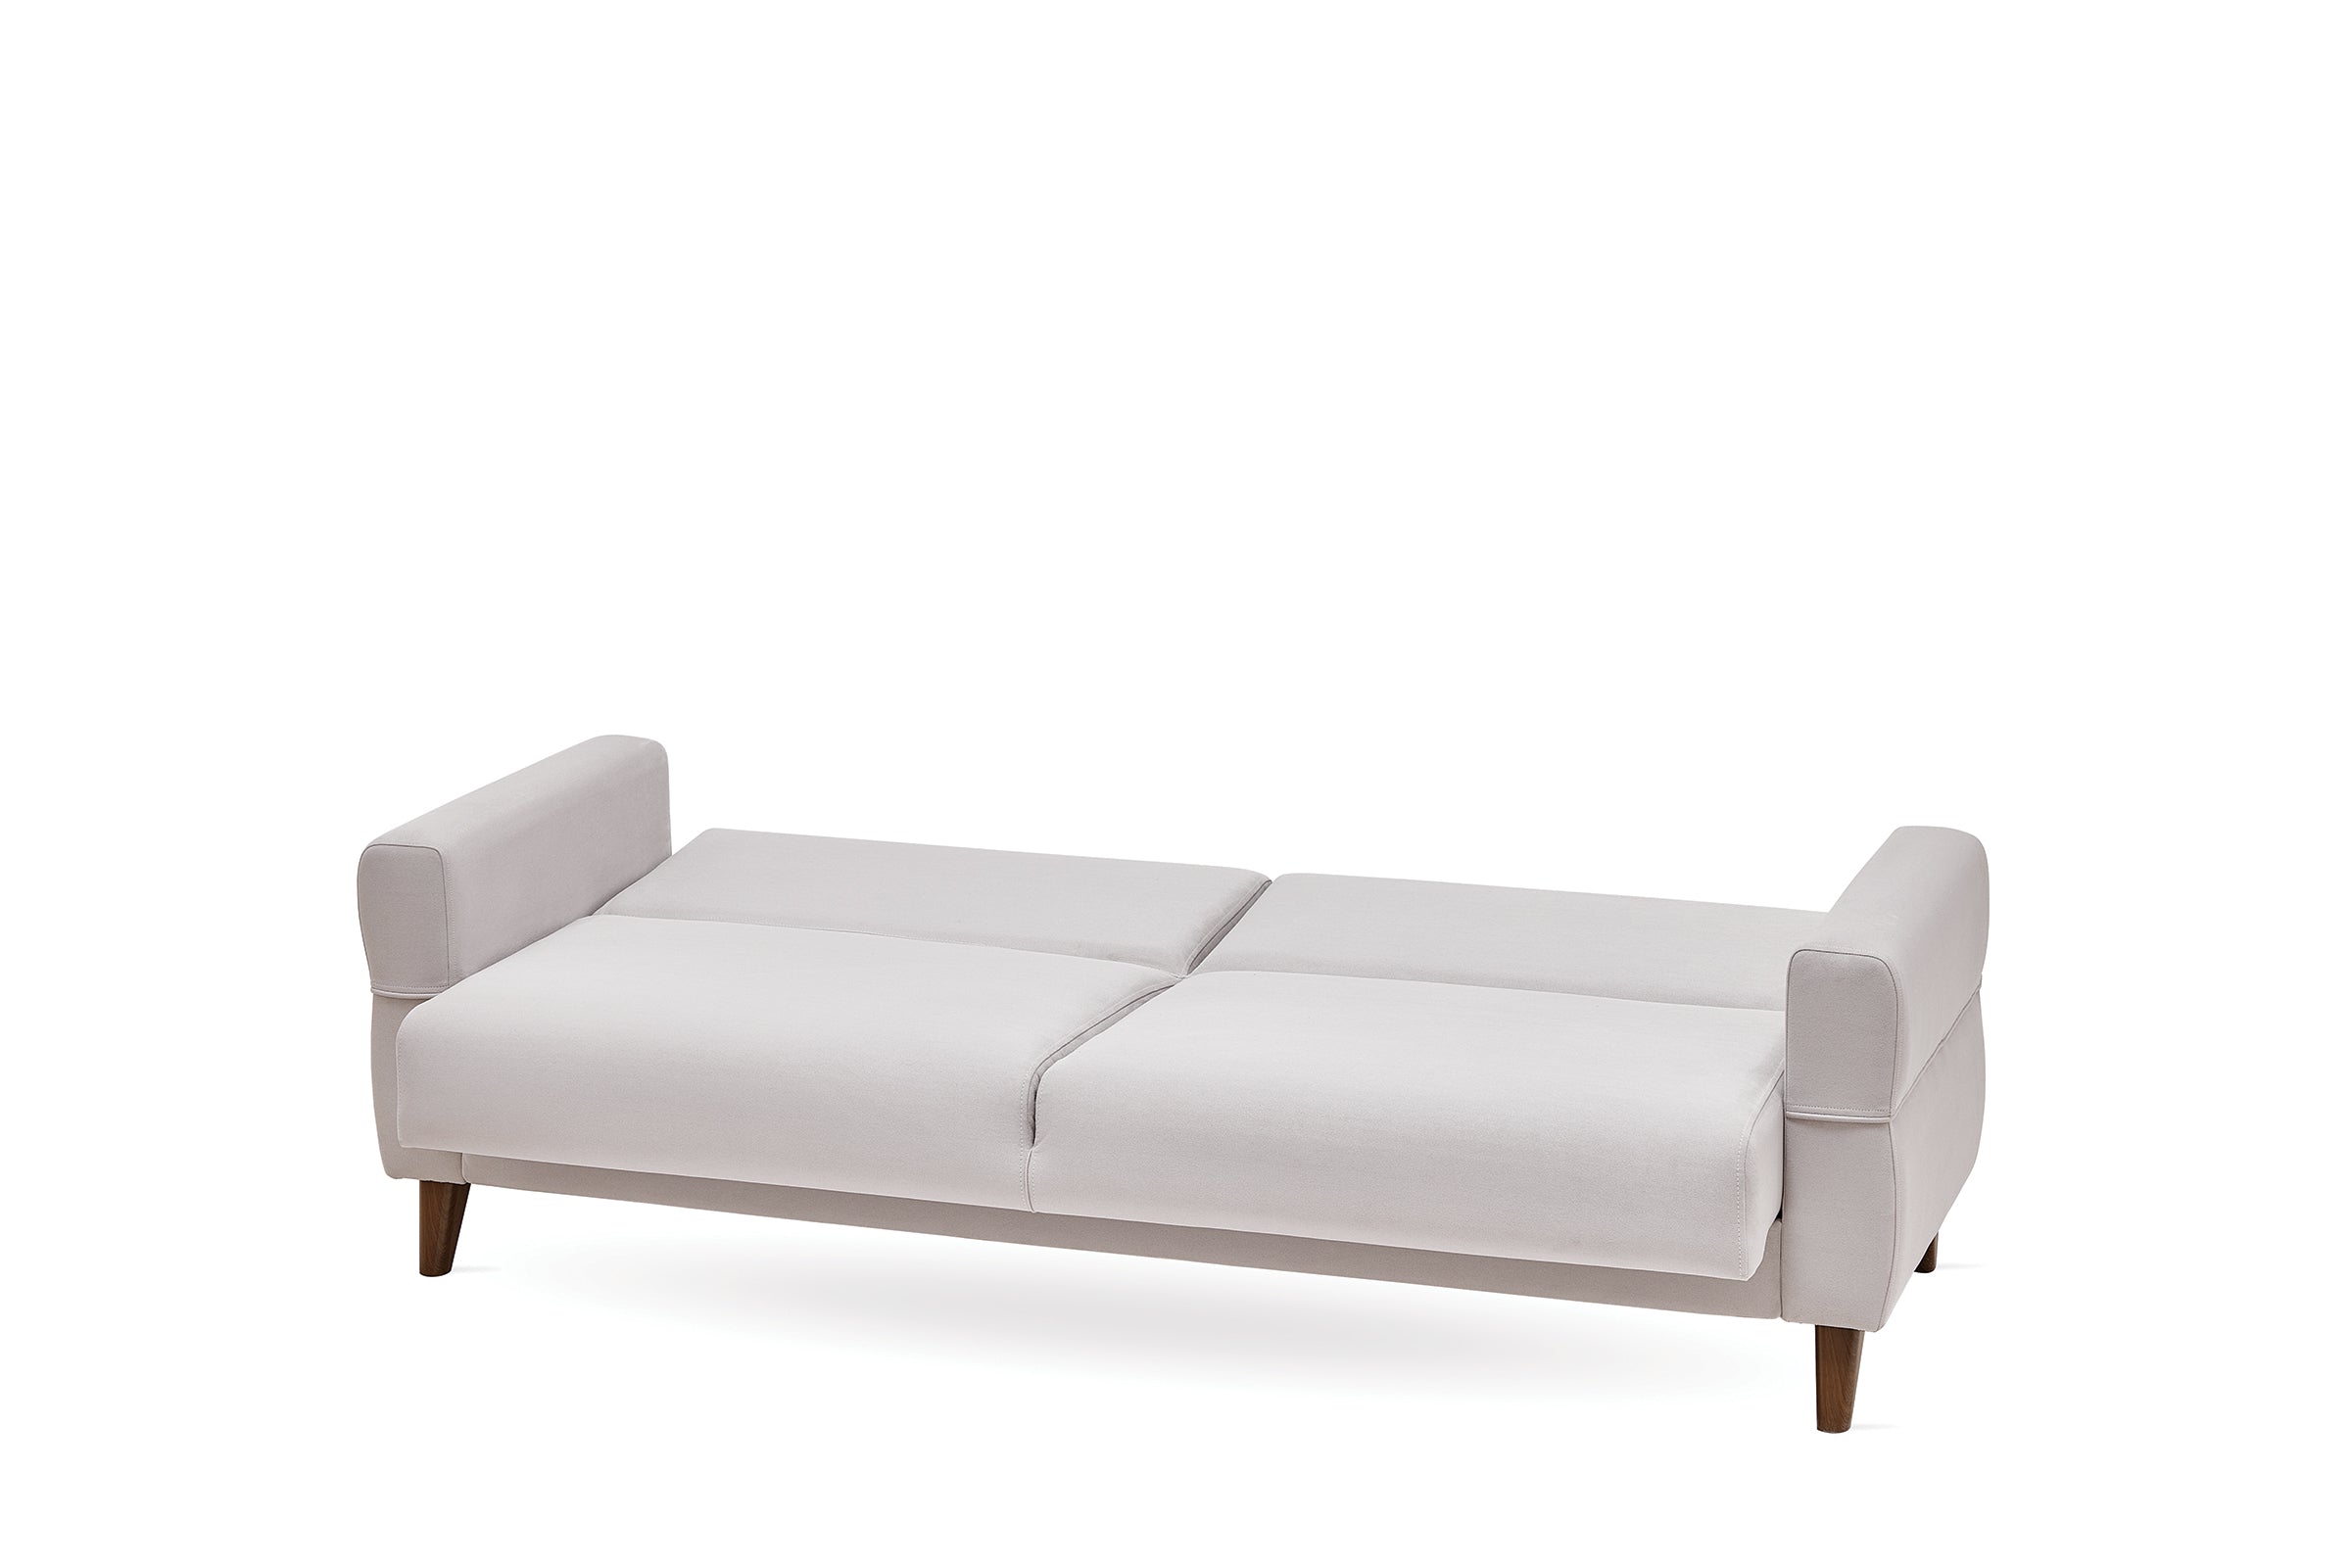 Astera Sand 3-Seater Sofa Bed with Storage - ASTERA 03.302 .0759.0958.0057.0000.21.26